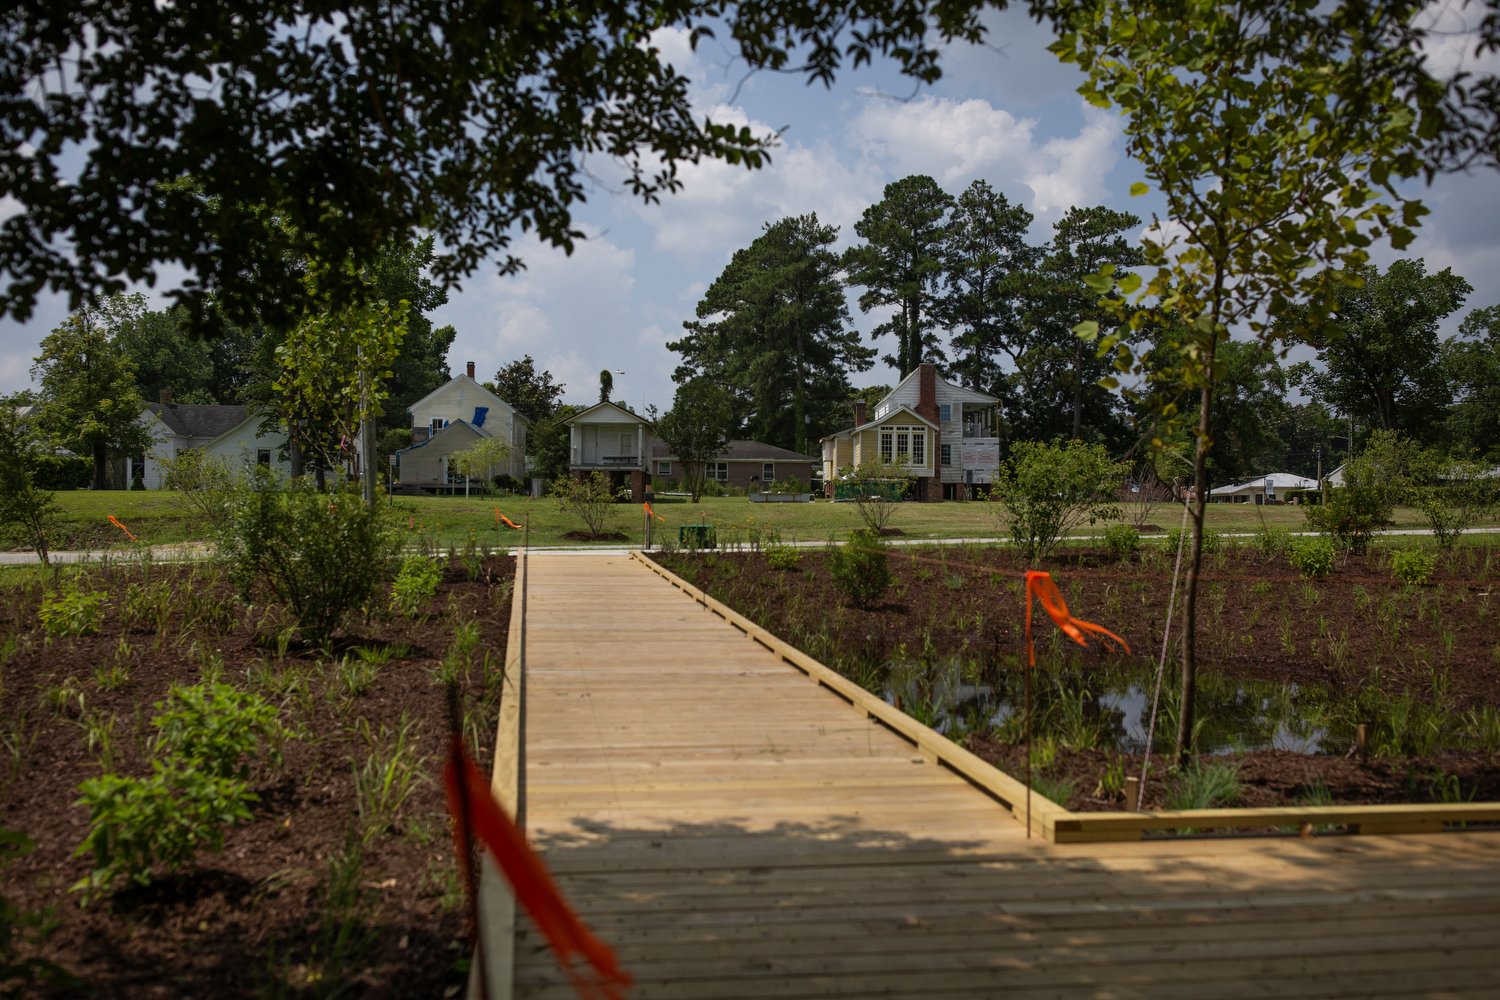  Bioretention ponds sit along the banks of the Trent River with the goal of mitigating the impact of future flooding on the town of Pollocksville, North Carolina. Hurricane Florence caused extensive flood damage to the town of less than 300 people in